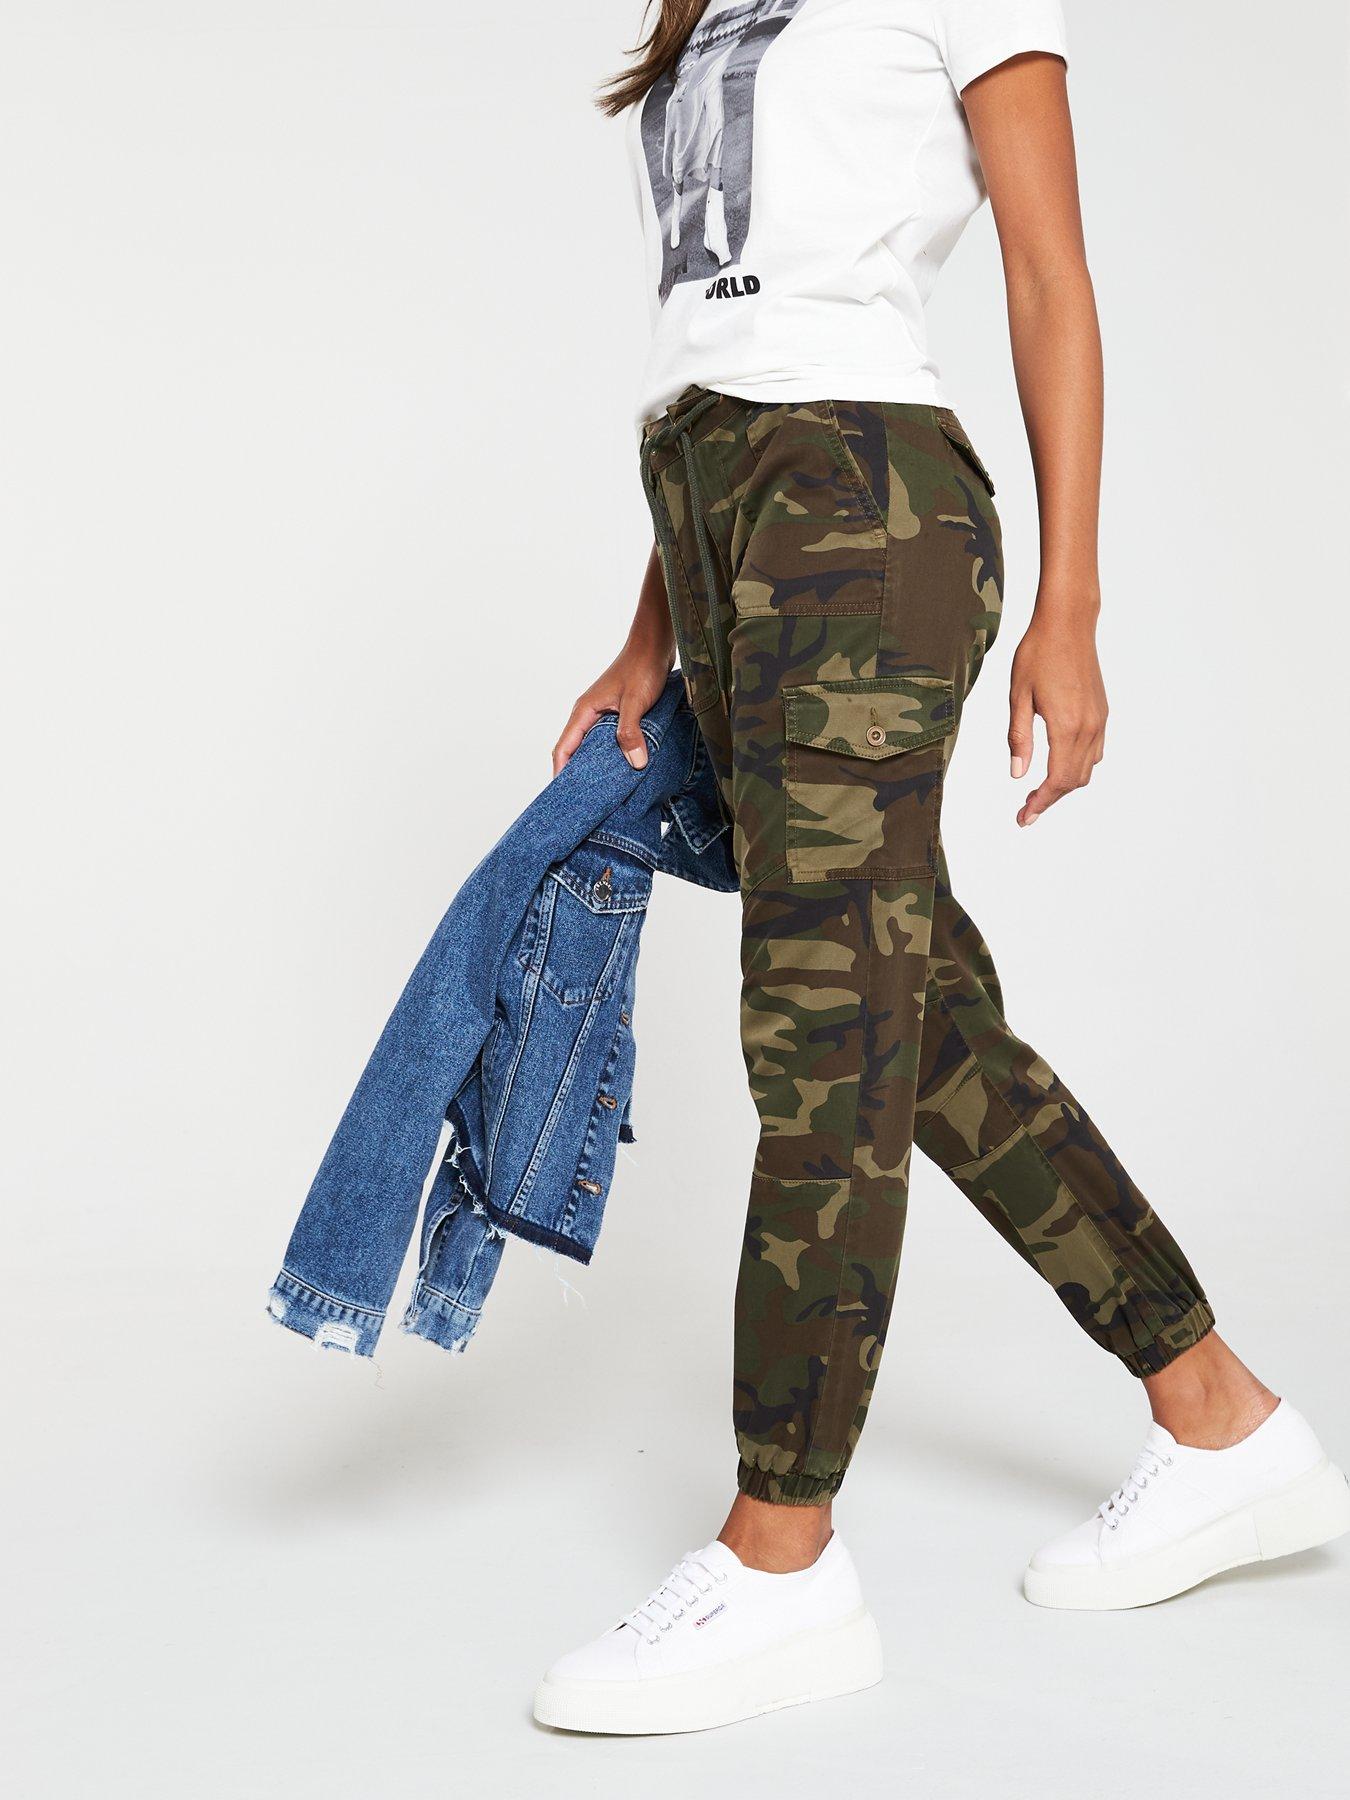 V by Very Camouflage Cargo Jogger - Camo Print